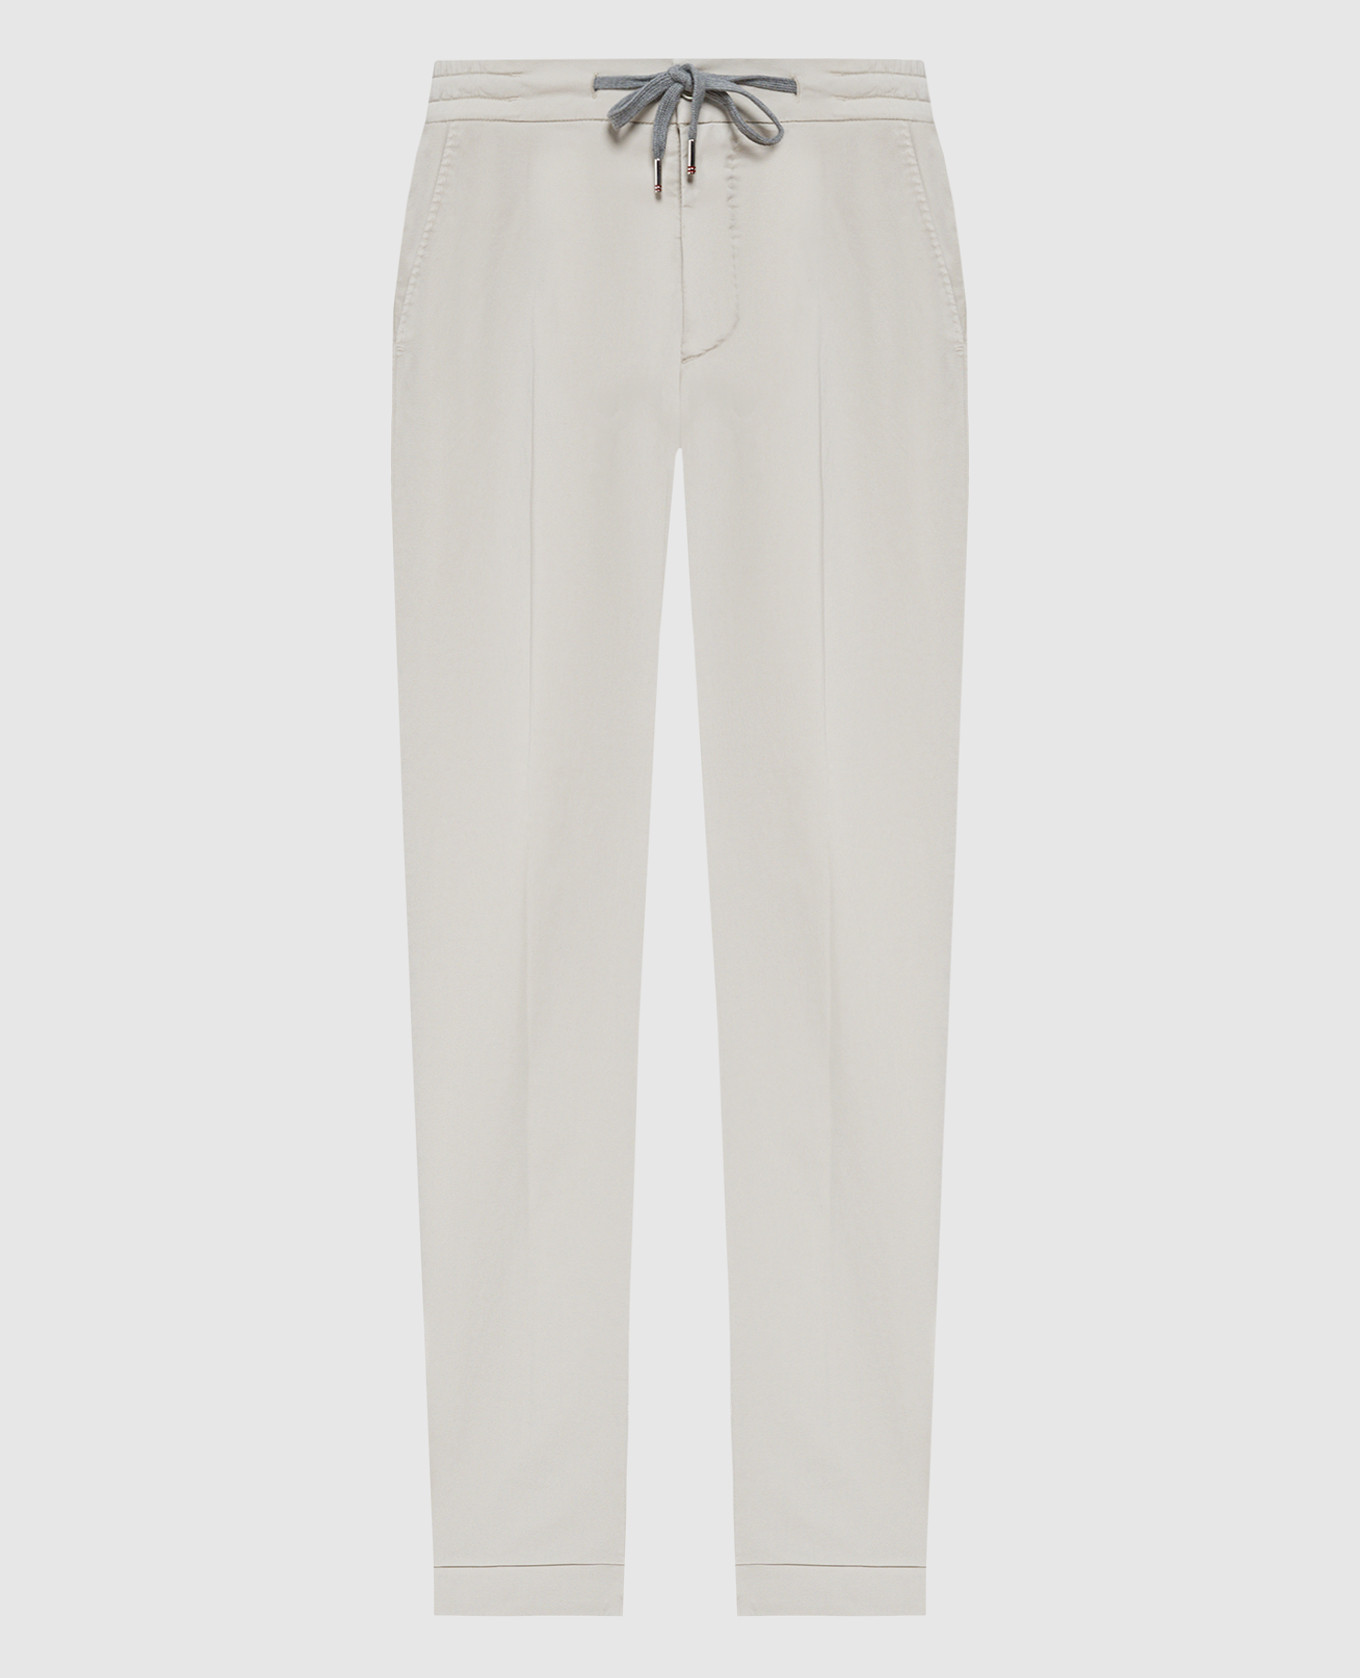 Beige tapered trousers by Caracciolo